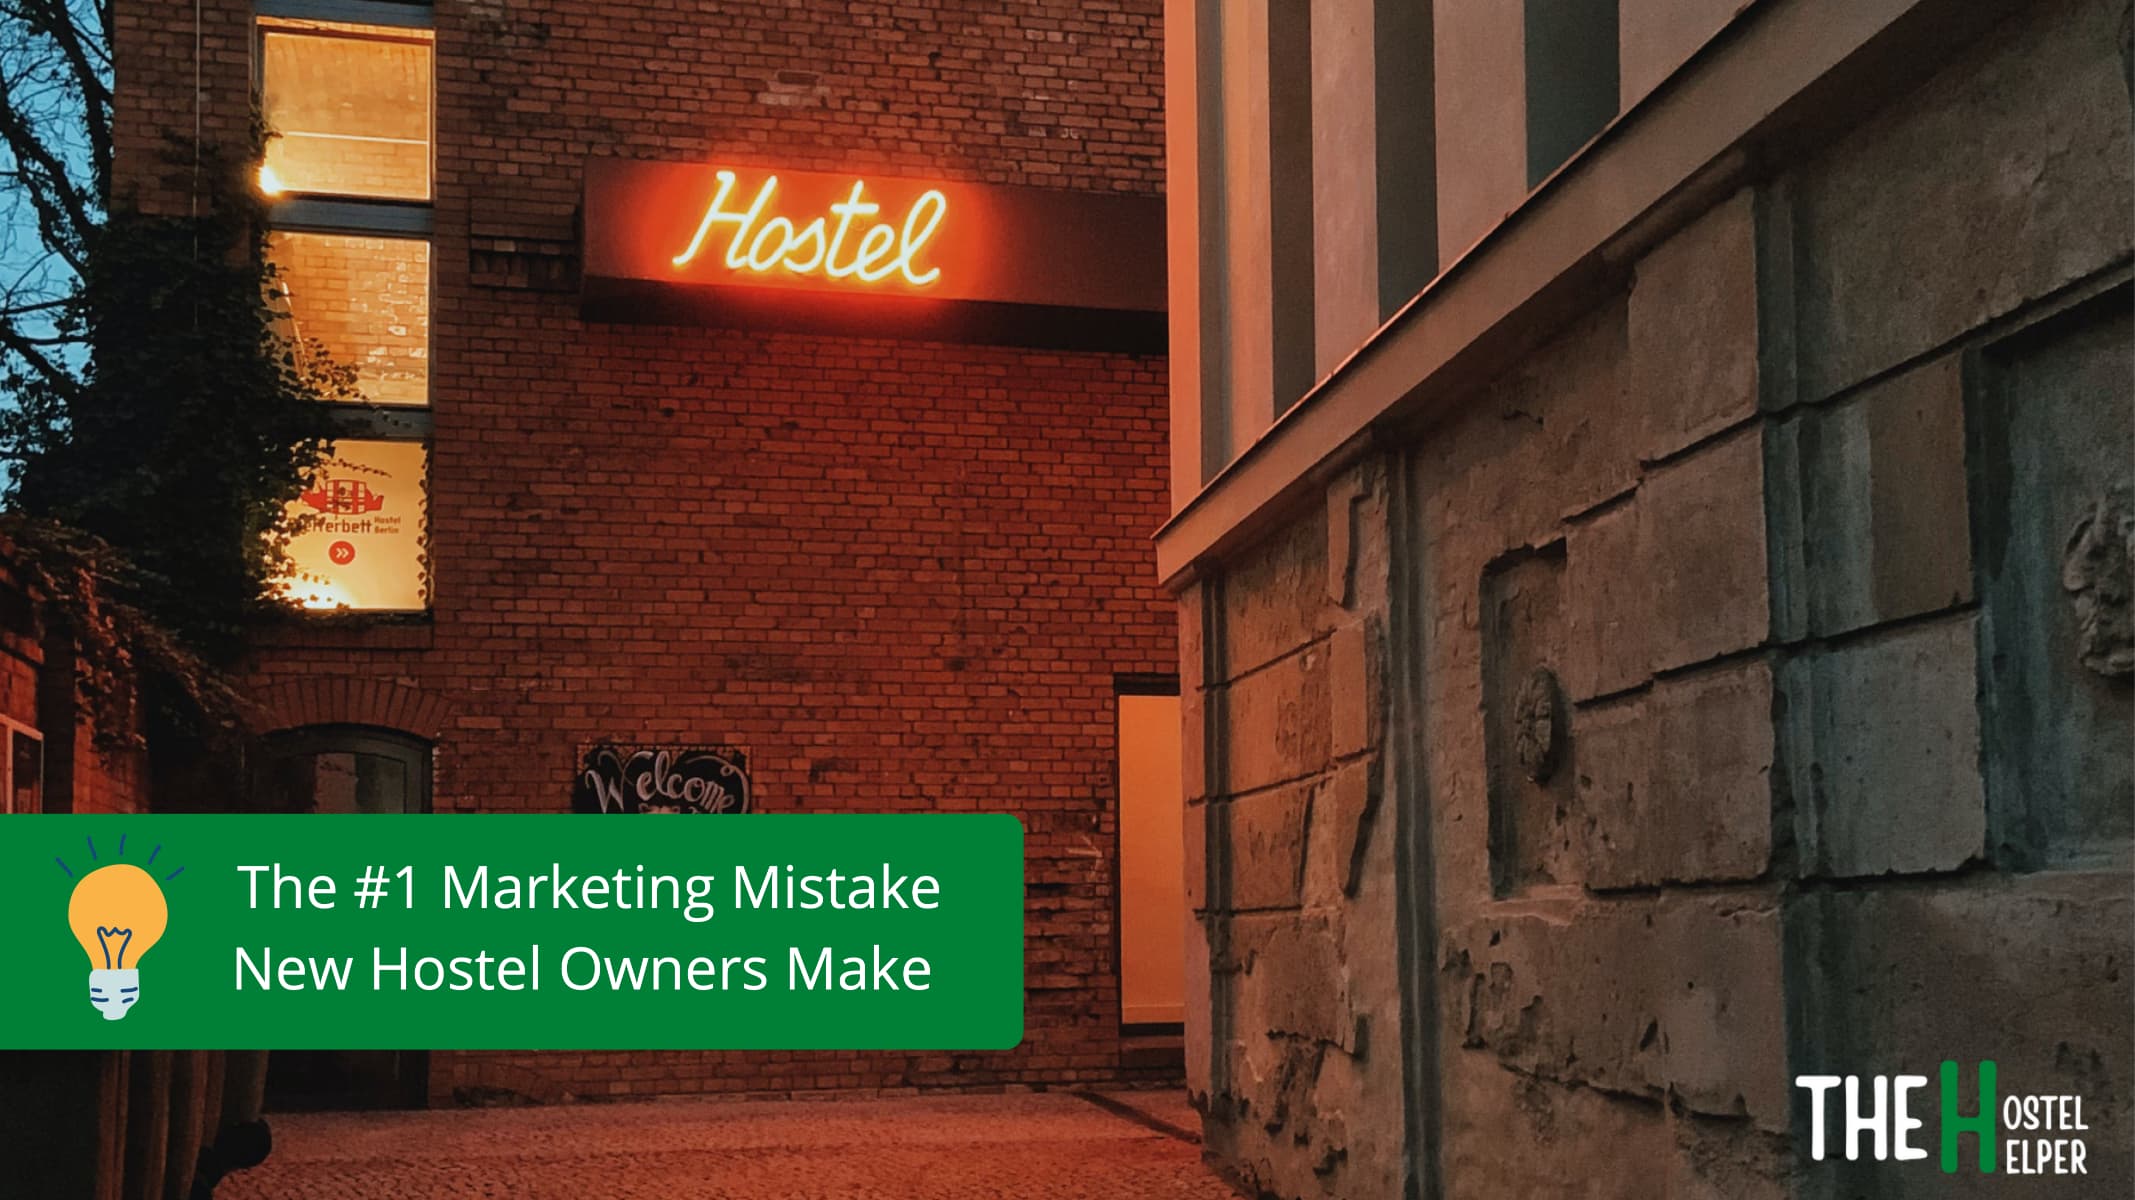 7 tips to choose your hostel name - the number 1 marketing mistake new hostel owners make - thehostelhelper.com - photo credit: Shobhit Sharma